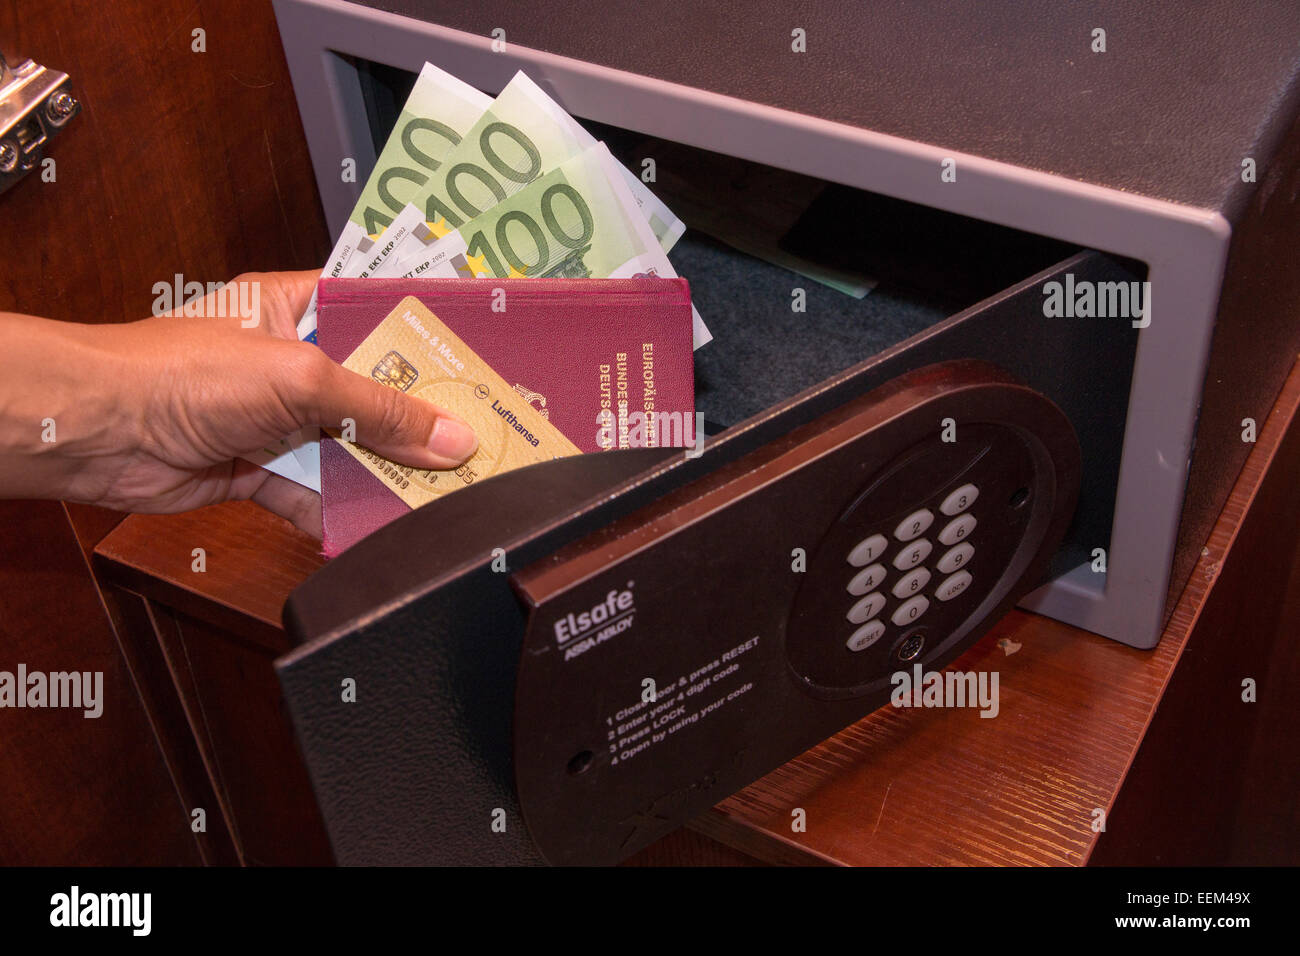 Open safe, hand holding credit card, passport and cash, in a hotel room Stock Photo